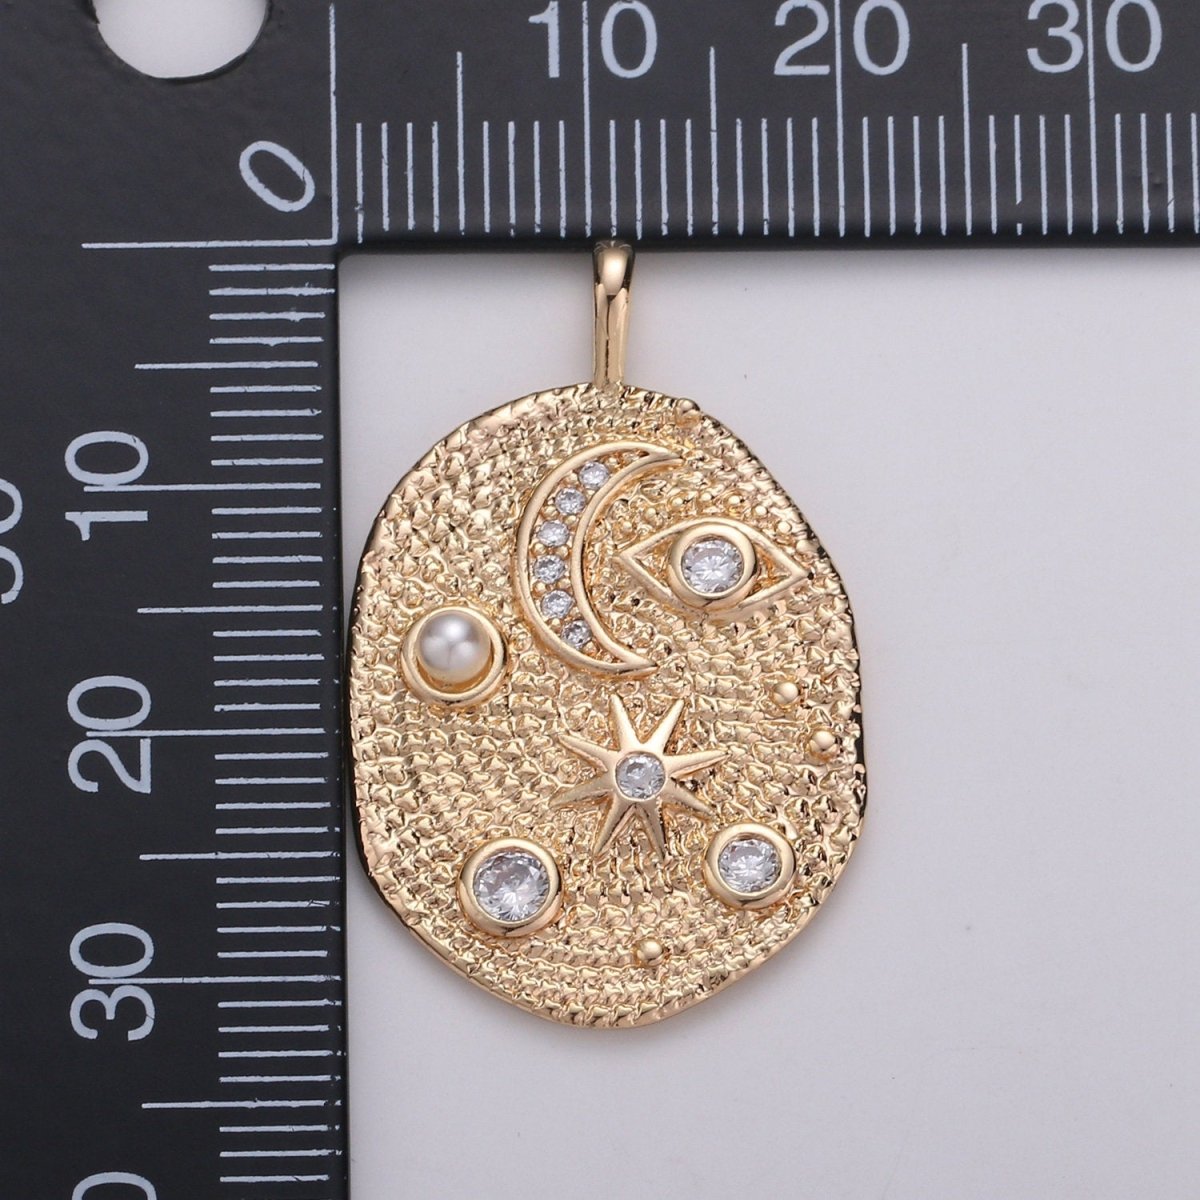 Pearl and Micro Pave Clear CZ Planet in the Ovum Pendant 14K Gold Filled Charm, Star, Crescent Moon, Galaxy, DIY Jewelry Necklace Making | D-738 - DLUXCA